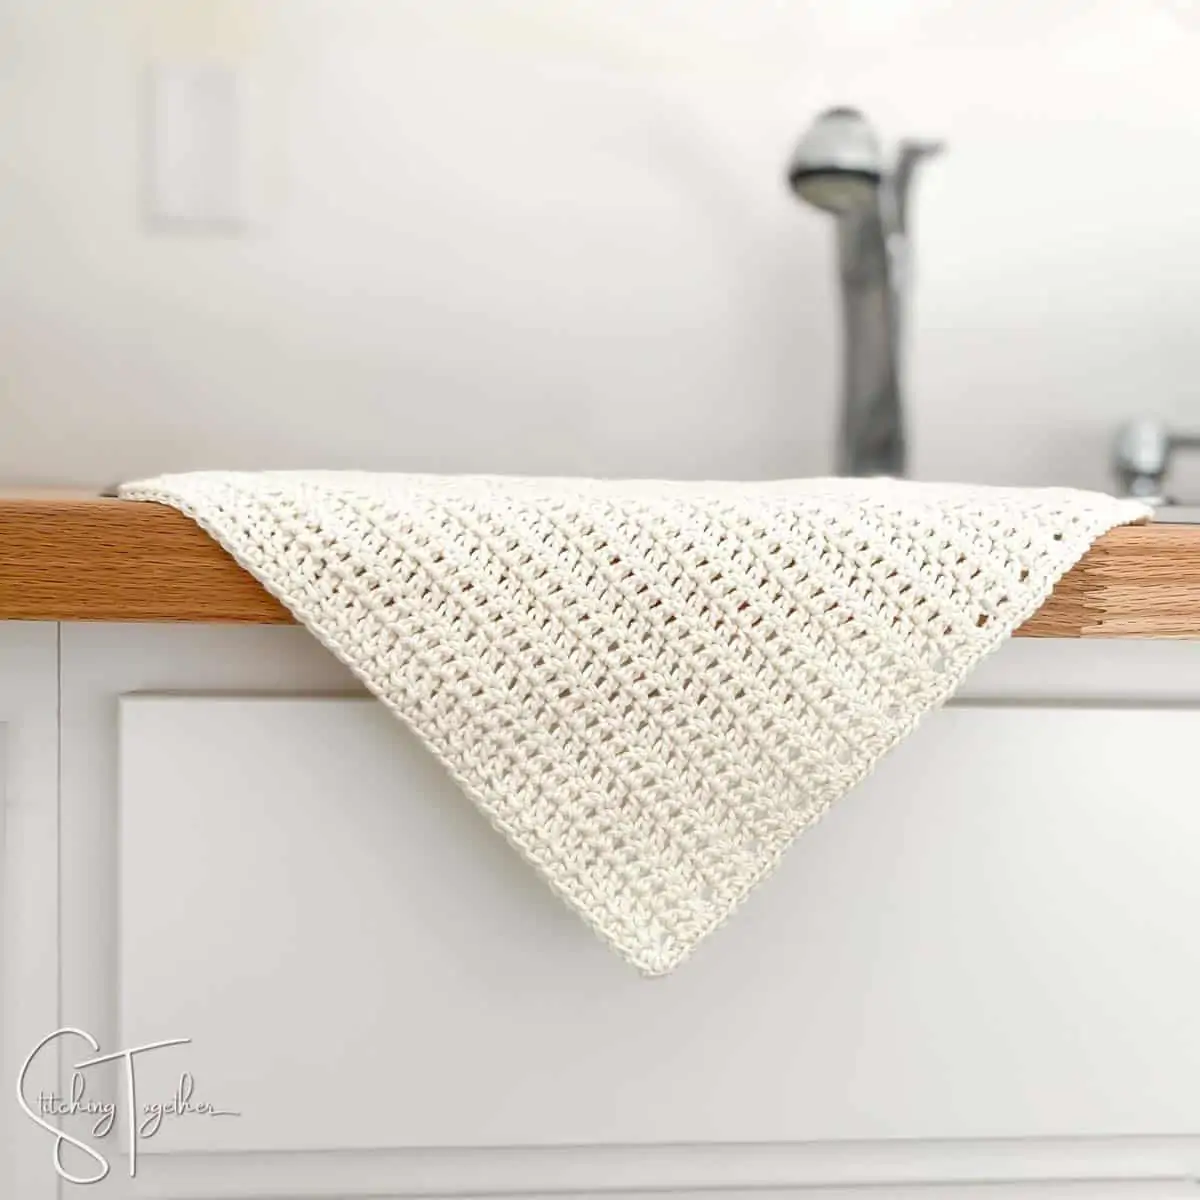 cream crochet dishcloth hanging over the side of the sink